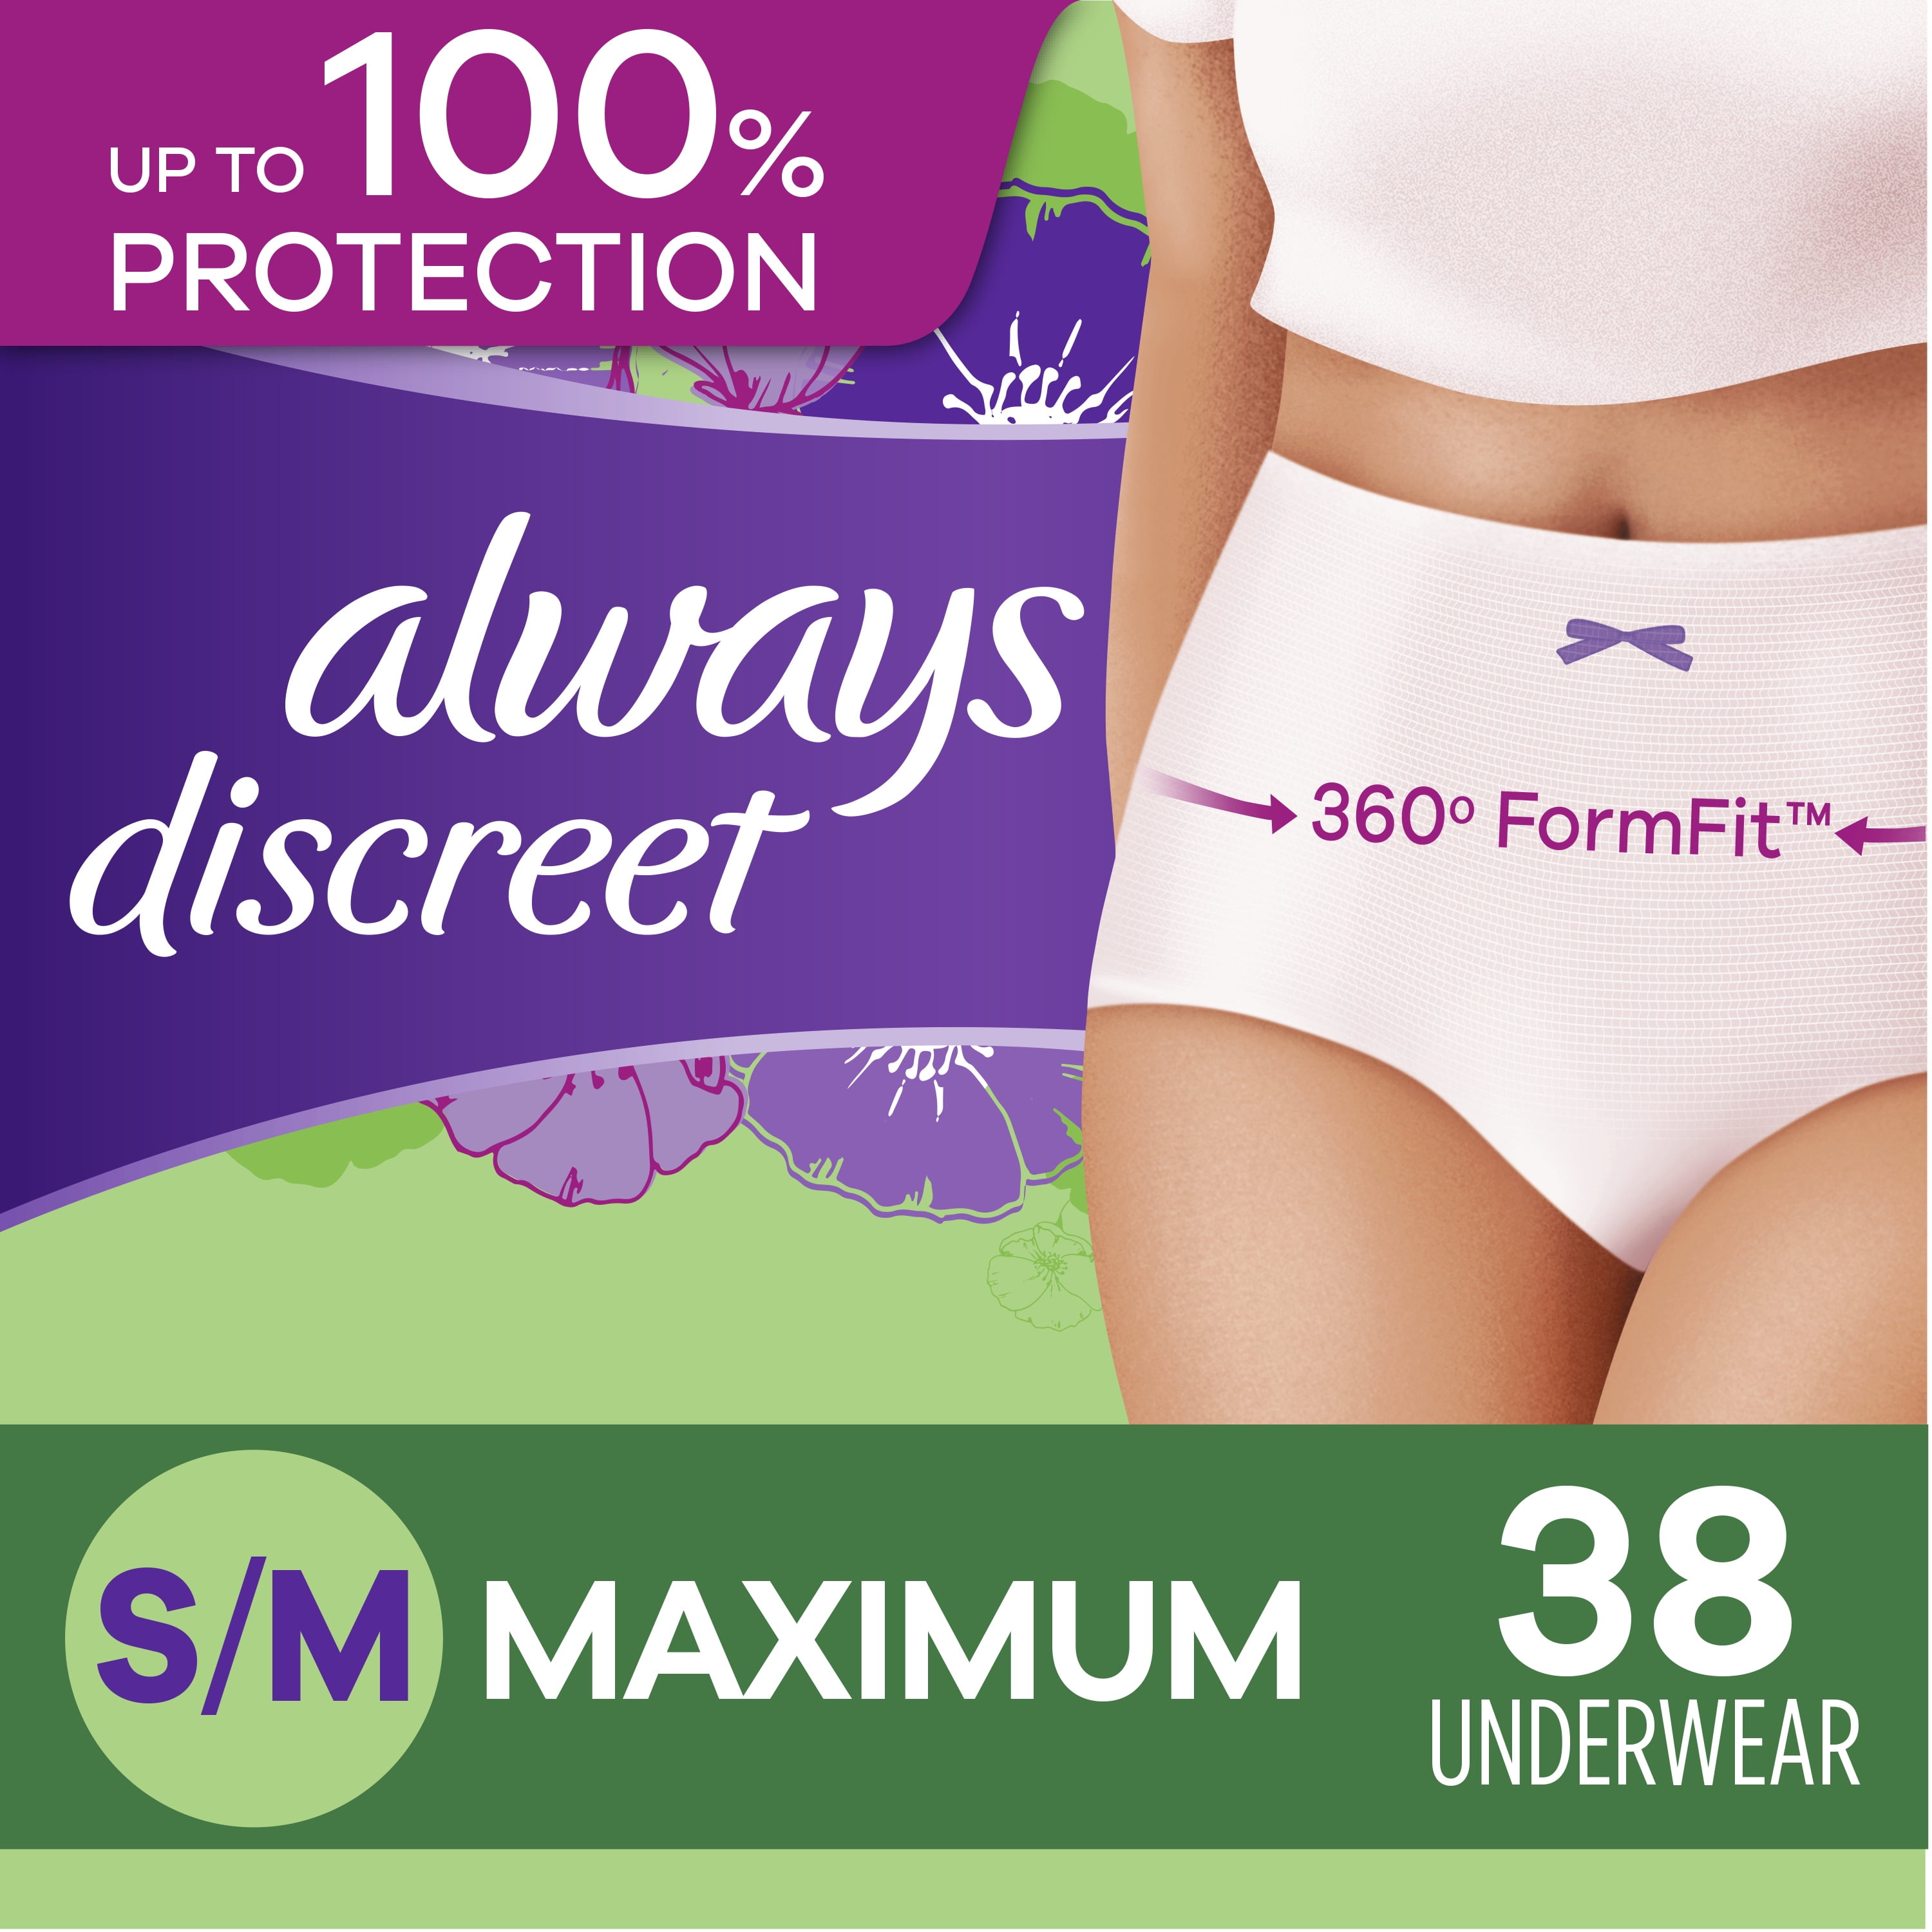 9 Best Incontinence Underwear for Women That Are Stylish